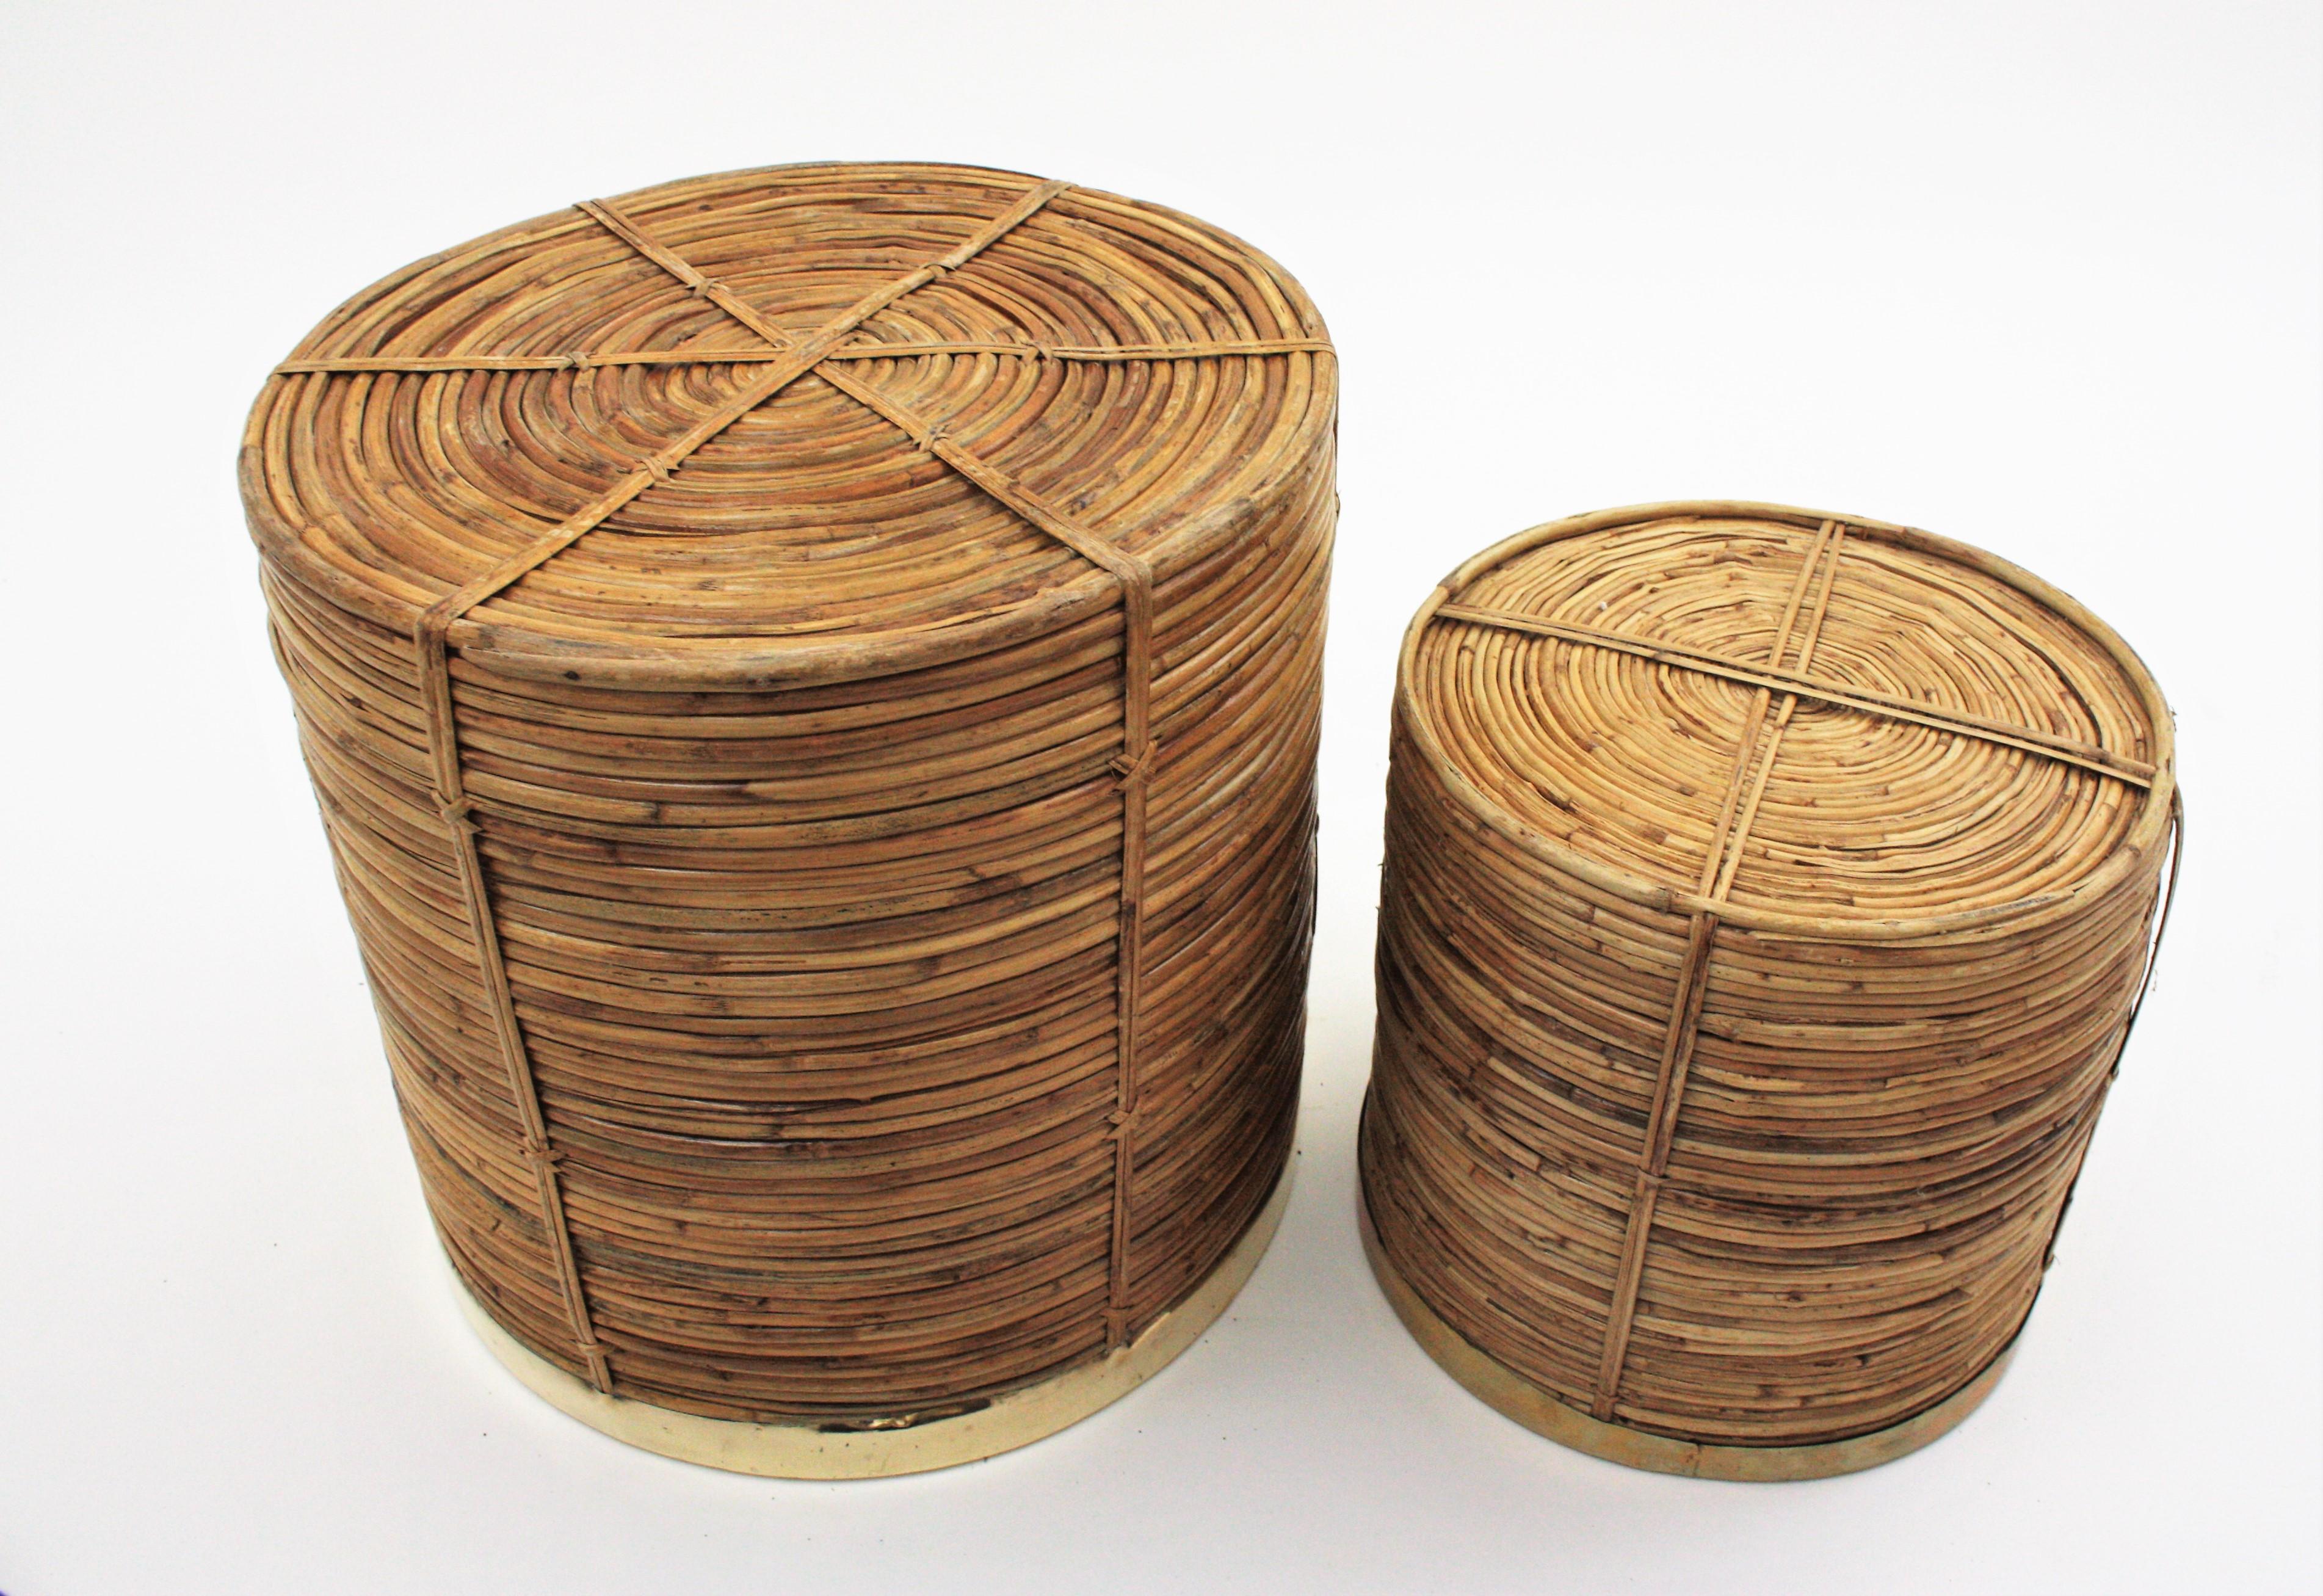 Pair of Mid-Century Brass & Rattan Bamboo Round Planters or Baskets, 1970s For Sale 2